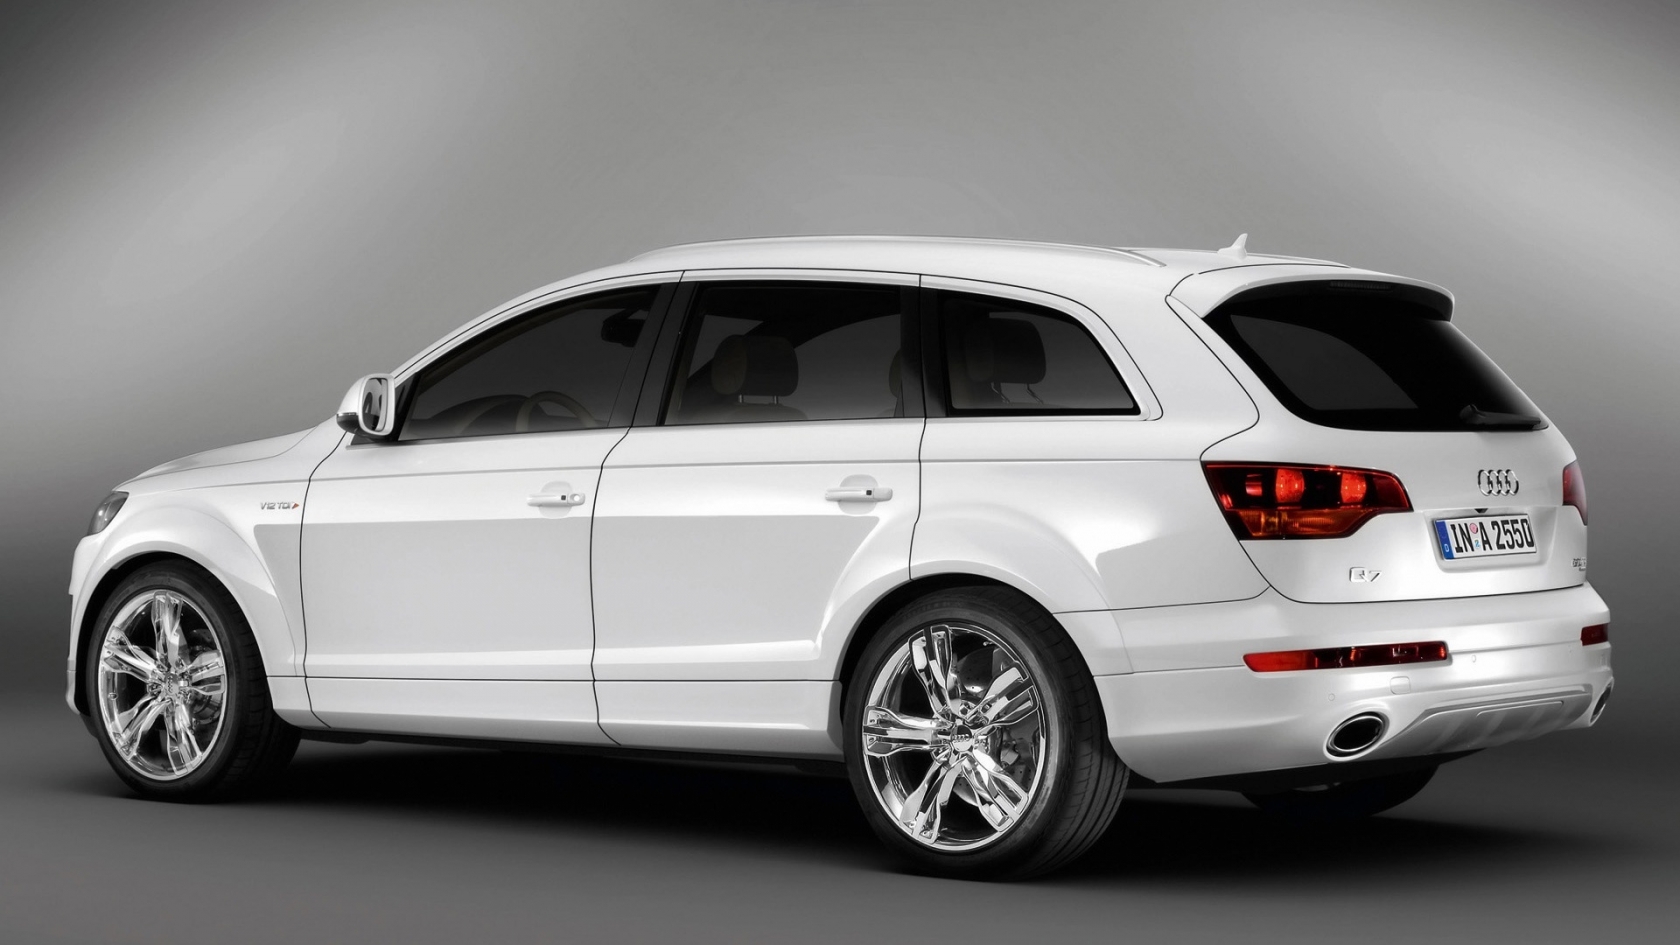 Audi Q7 Coastline Rear and Side for 1680 x 945 HDTV resolution